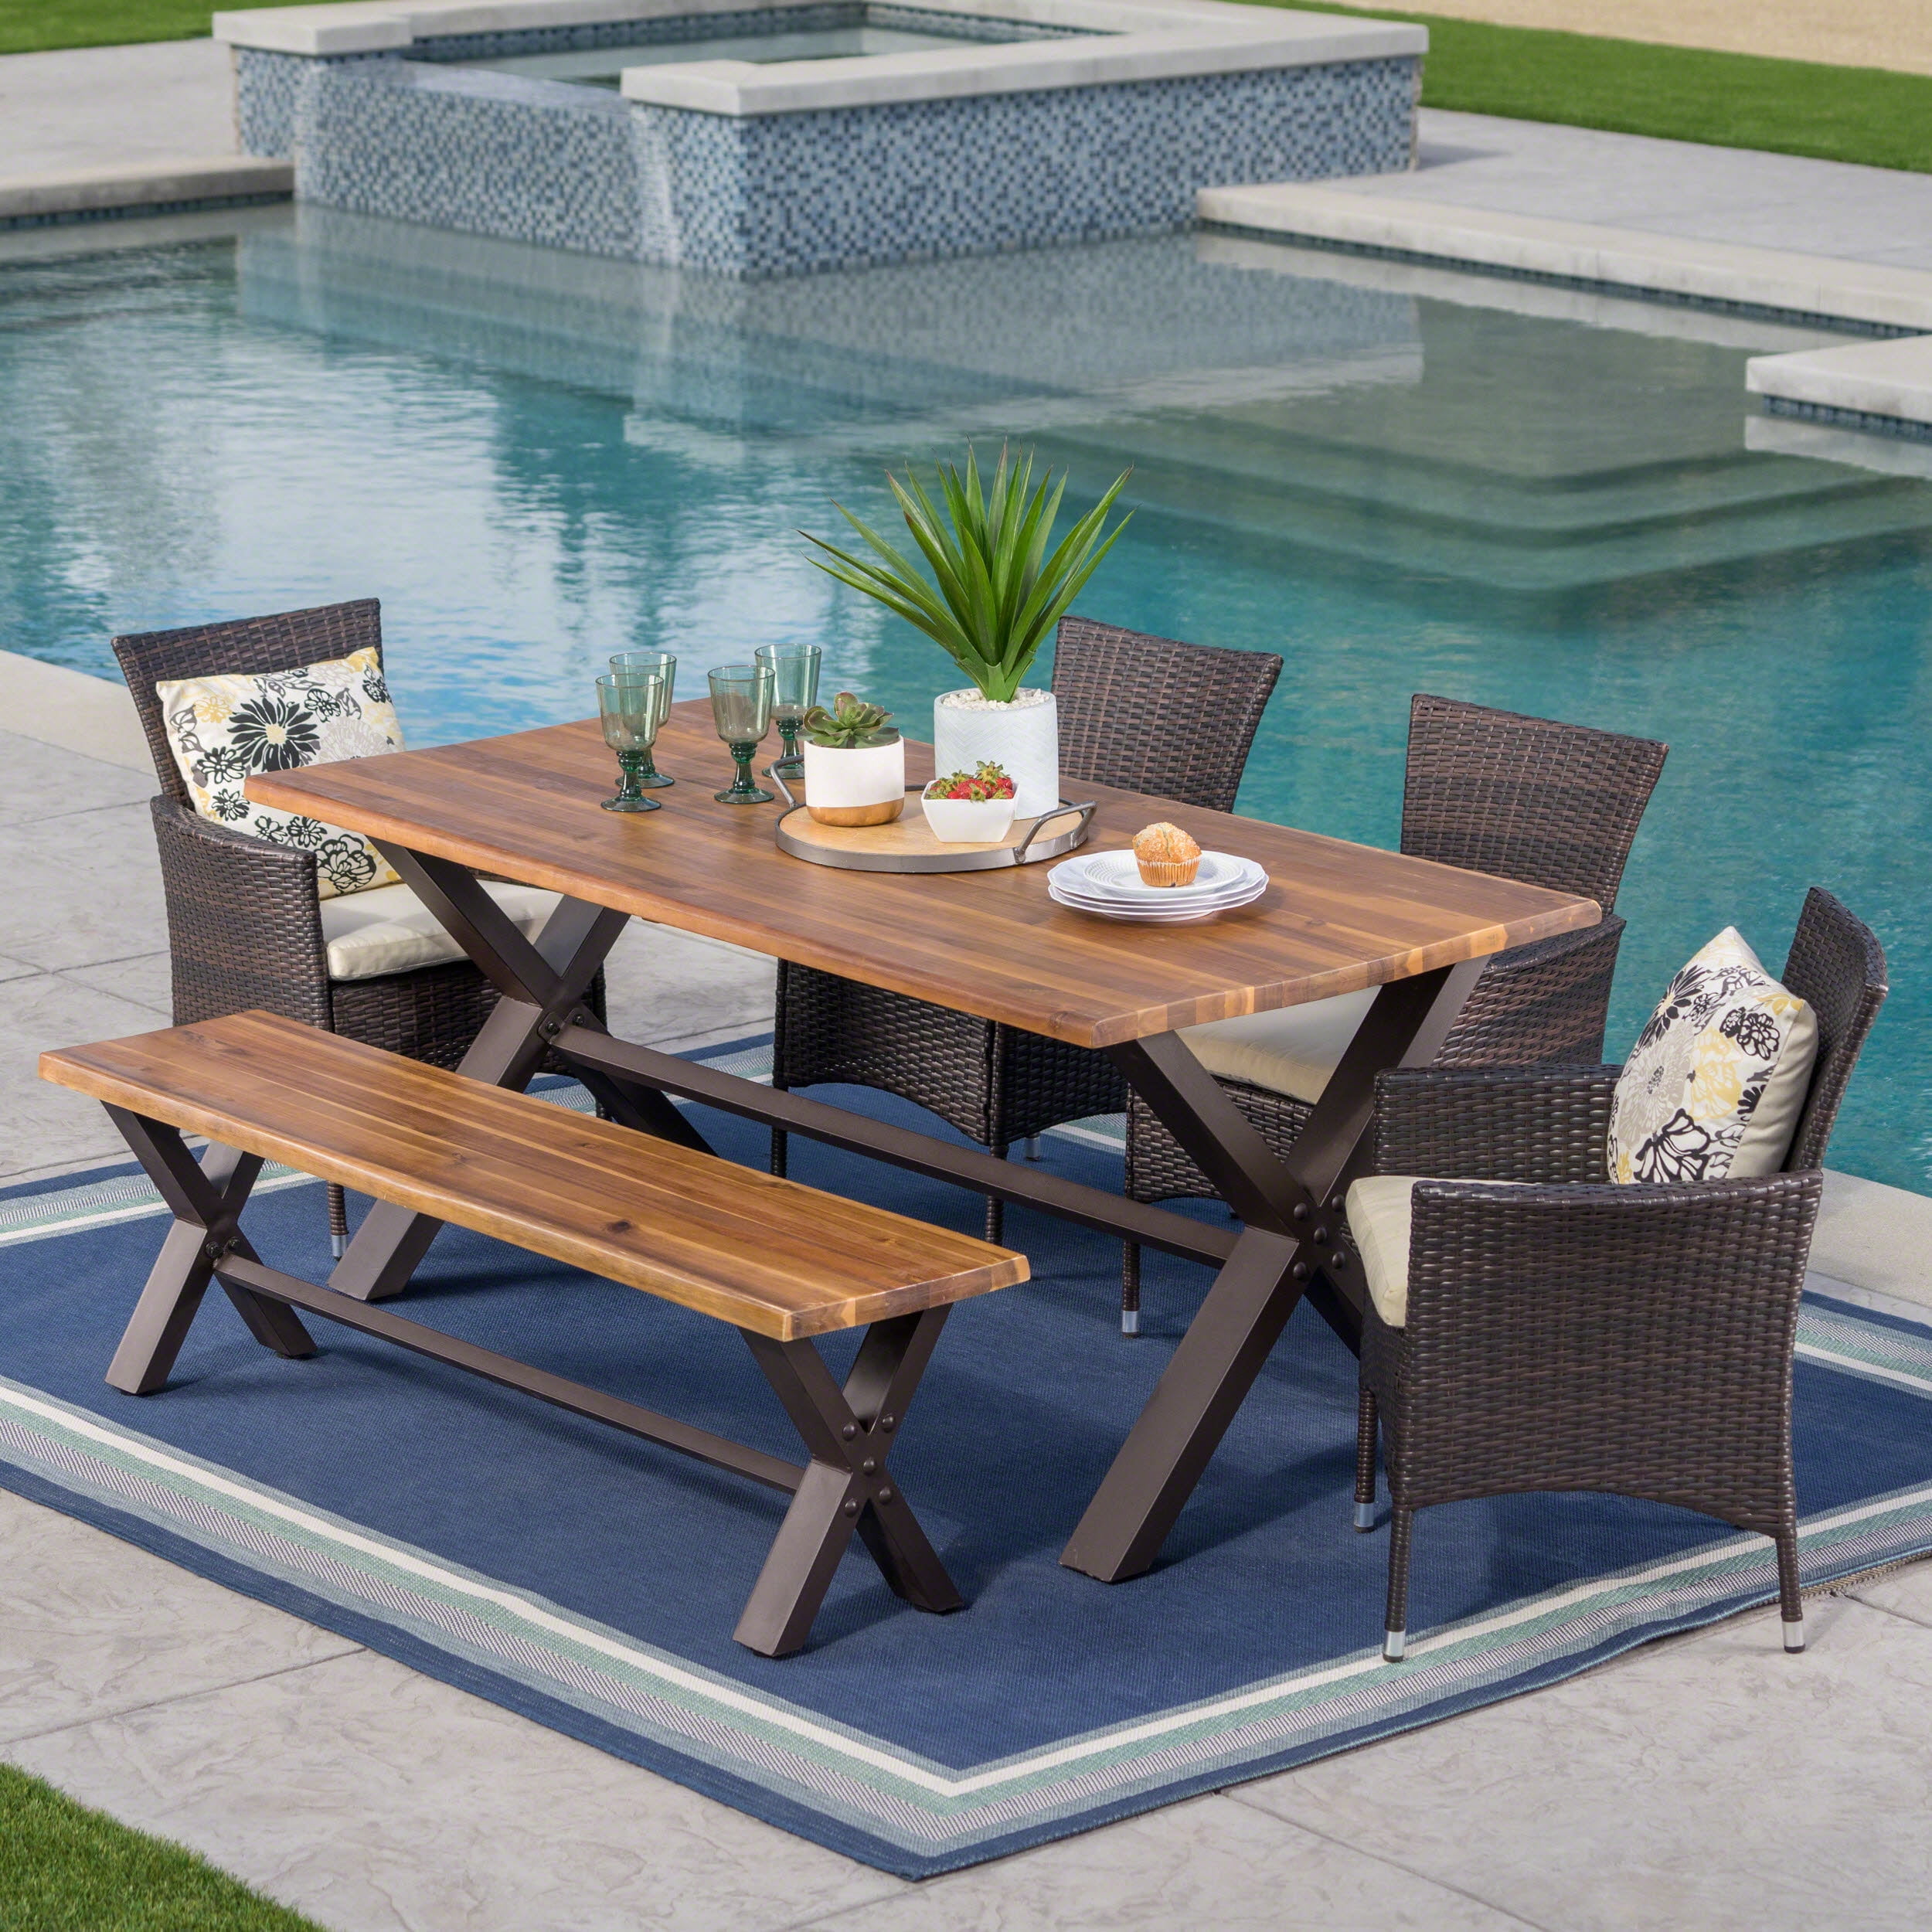 Bradley Outdoor 6 Piece Acacia Wood Dining Set with Wicker Dining